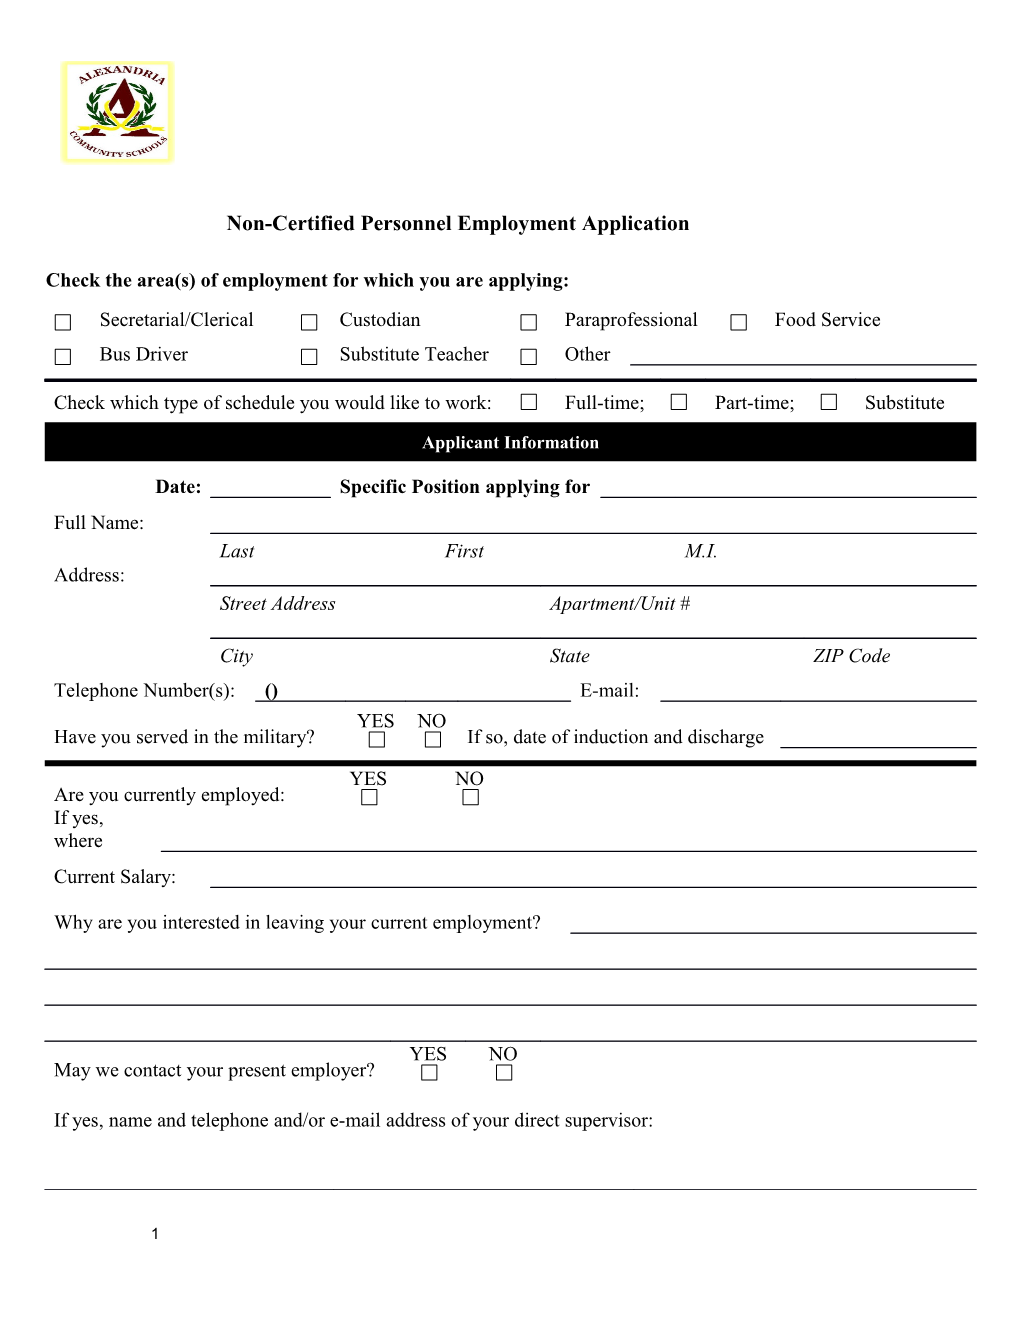 Non-Certified Personnel Employment Application